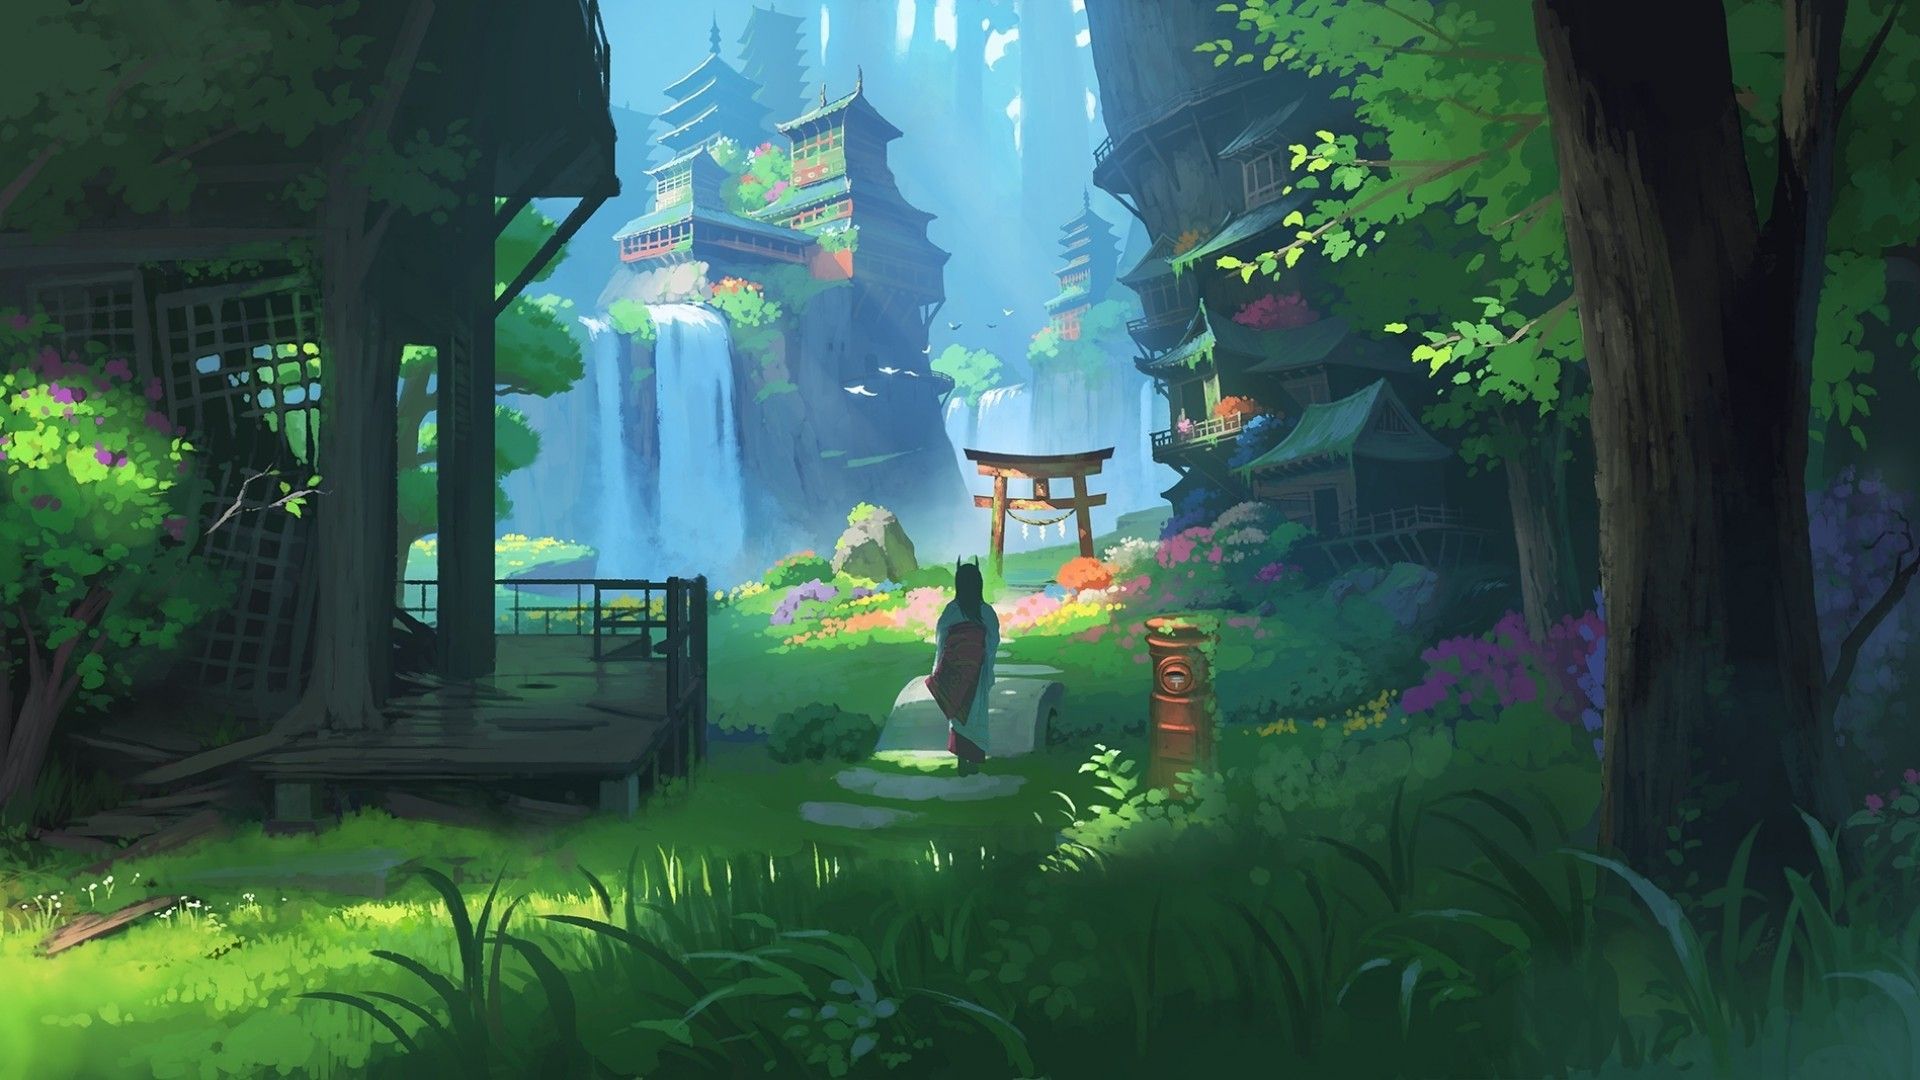 Download 1920x1080 Anime Landscape, Waterfall, Fantasy, Asian Buildings, Japanese Clothes, Horns Wallpaper for Widescreen